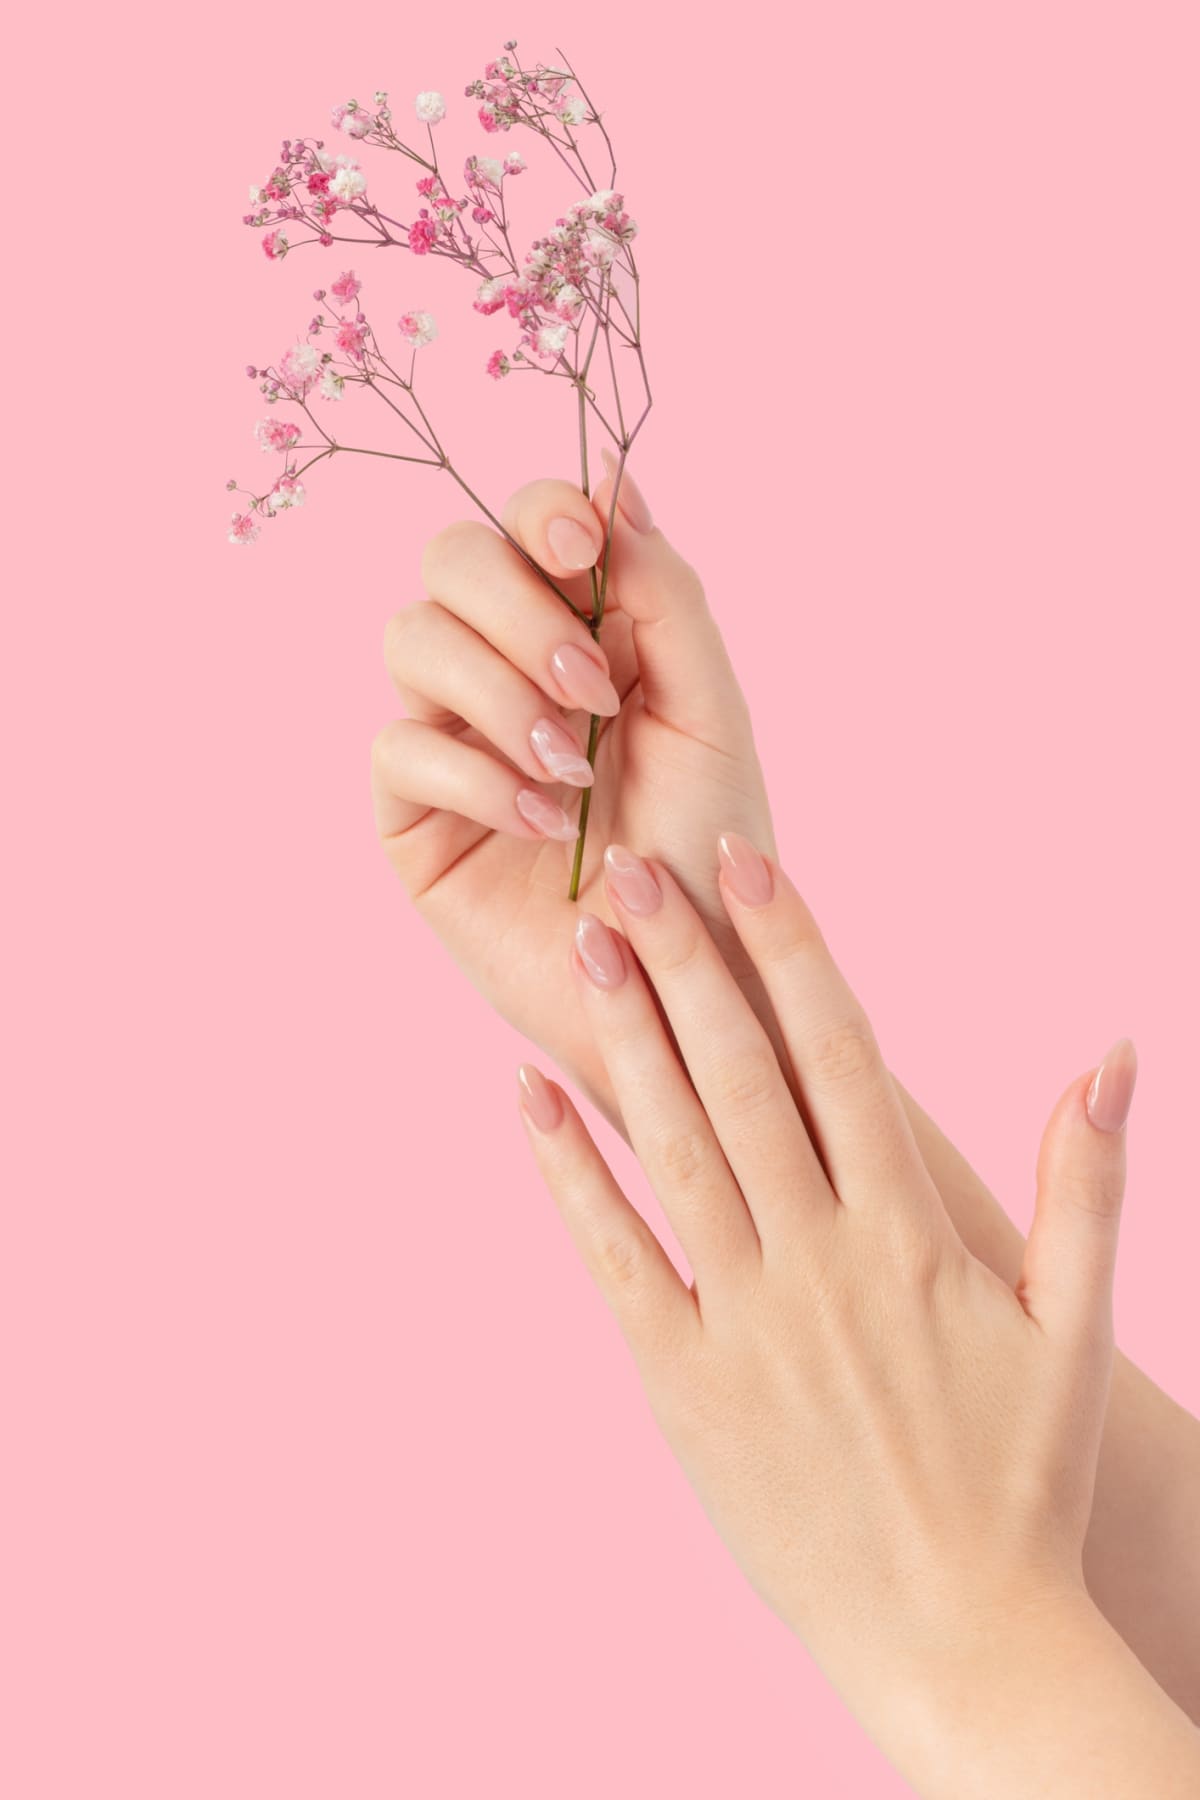 two female hands with almond shaped nails and pink nail polish and white embellishments holding a flower